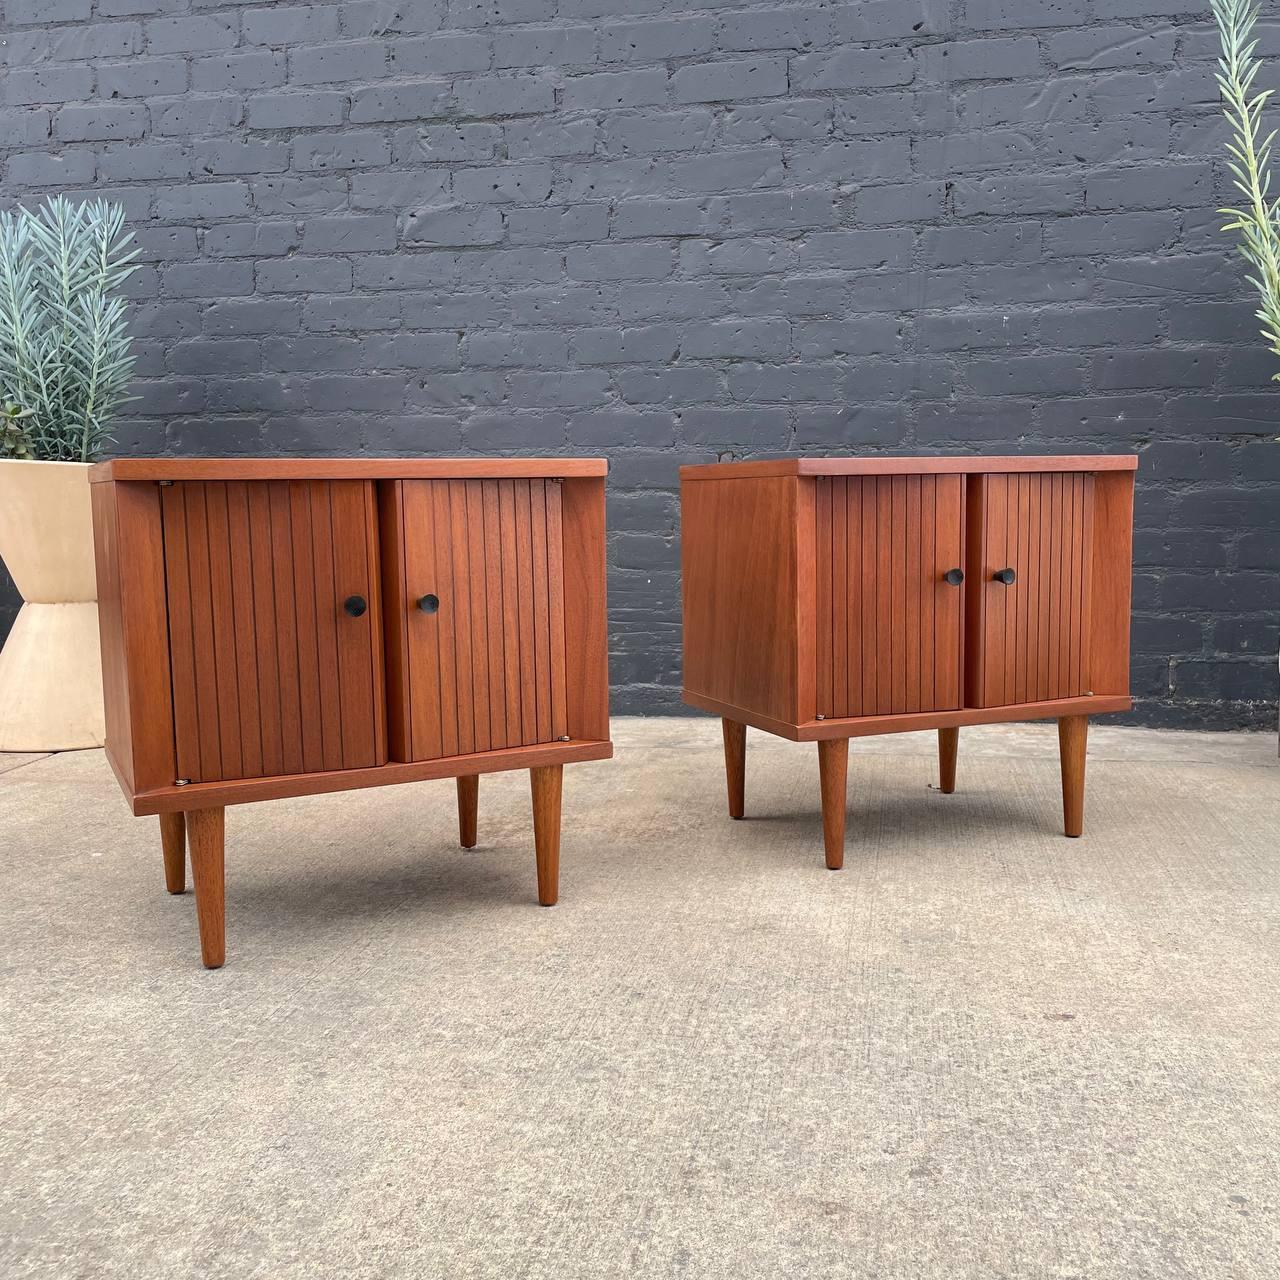 Newly Refinished - Pair of Mid-Century Modern Walnut Night Stands by Basic-Witz

Year: c.1960’s

With over 15 years of experience, our workshop has followed a careful process of restoration, showcasing our passion and creativity for vintage designs